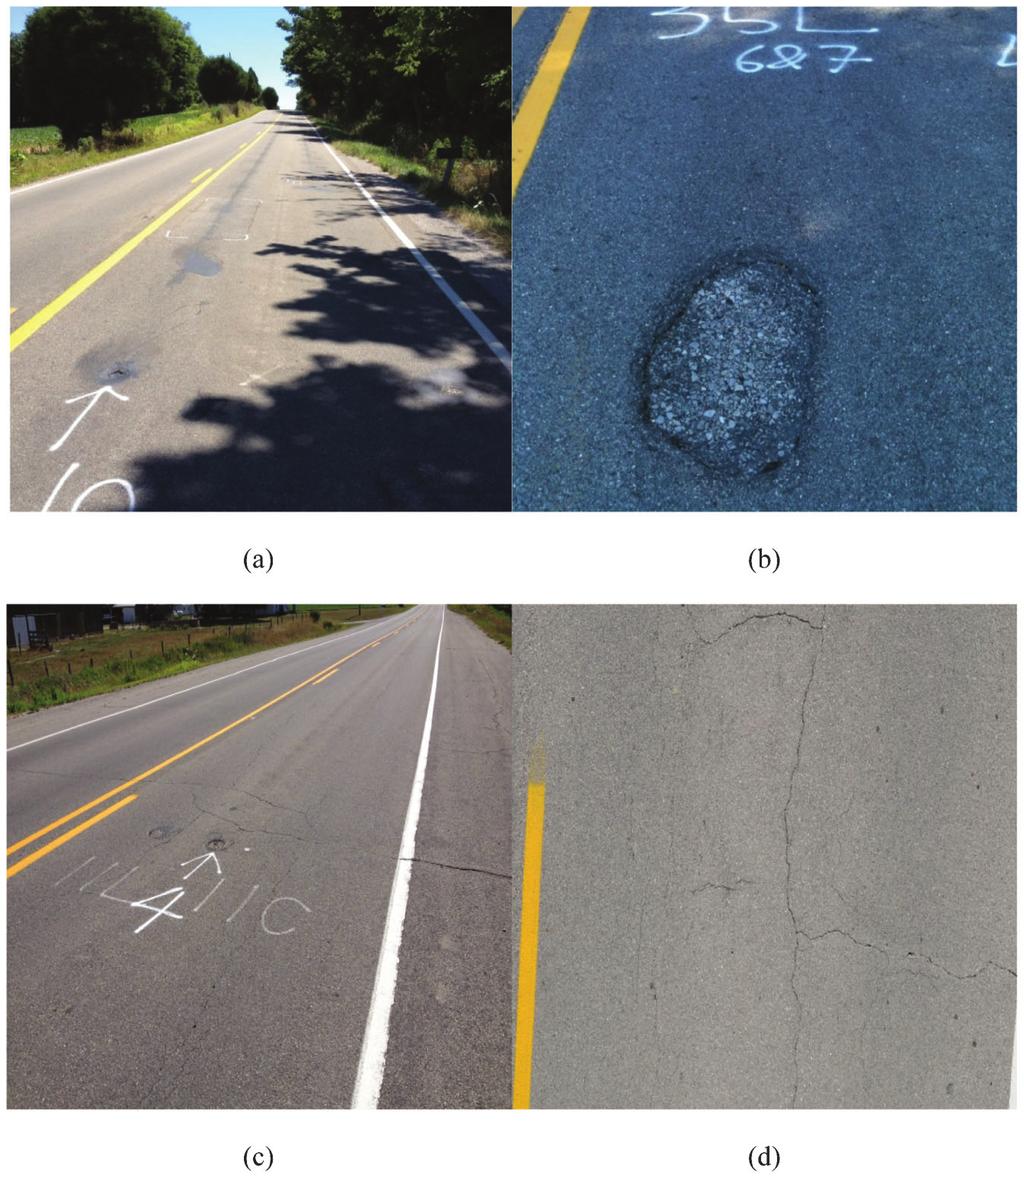 Figure 3.10 Surface distresses on the test section: (a) patch and core holes; (b) pothole; (c) fatigue cracks with core holes; (d) fatigue cracks.